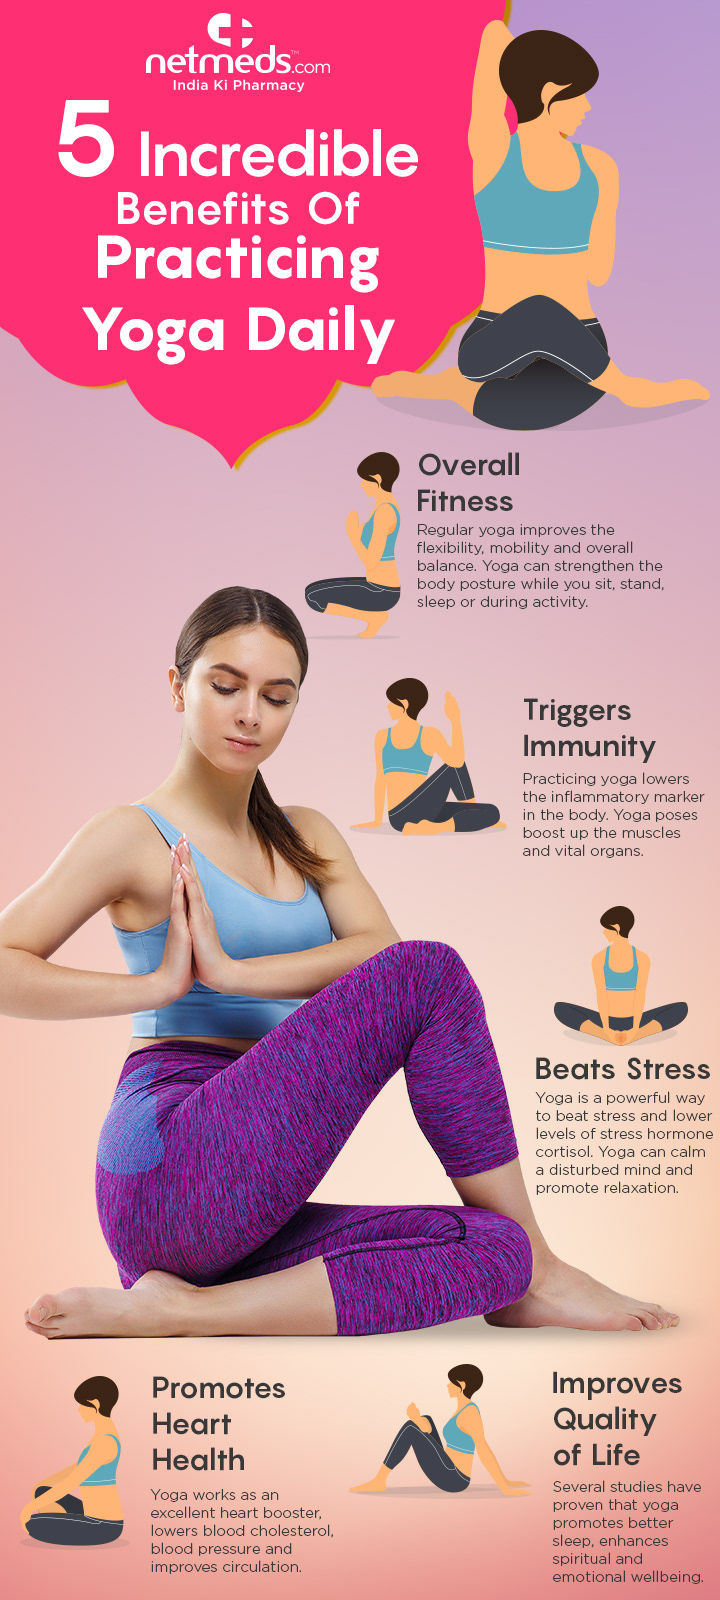 Yoga India UI ux practices disciplines physical strong women beauty